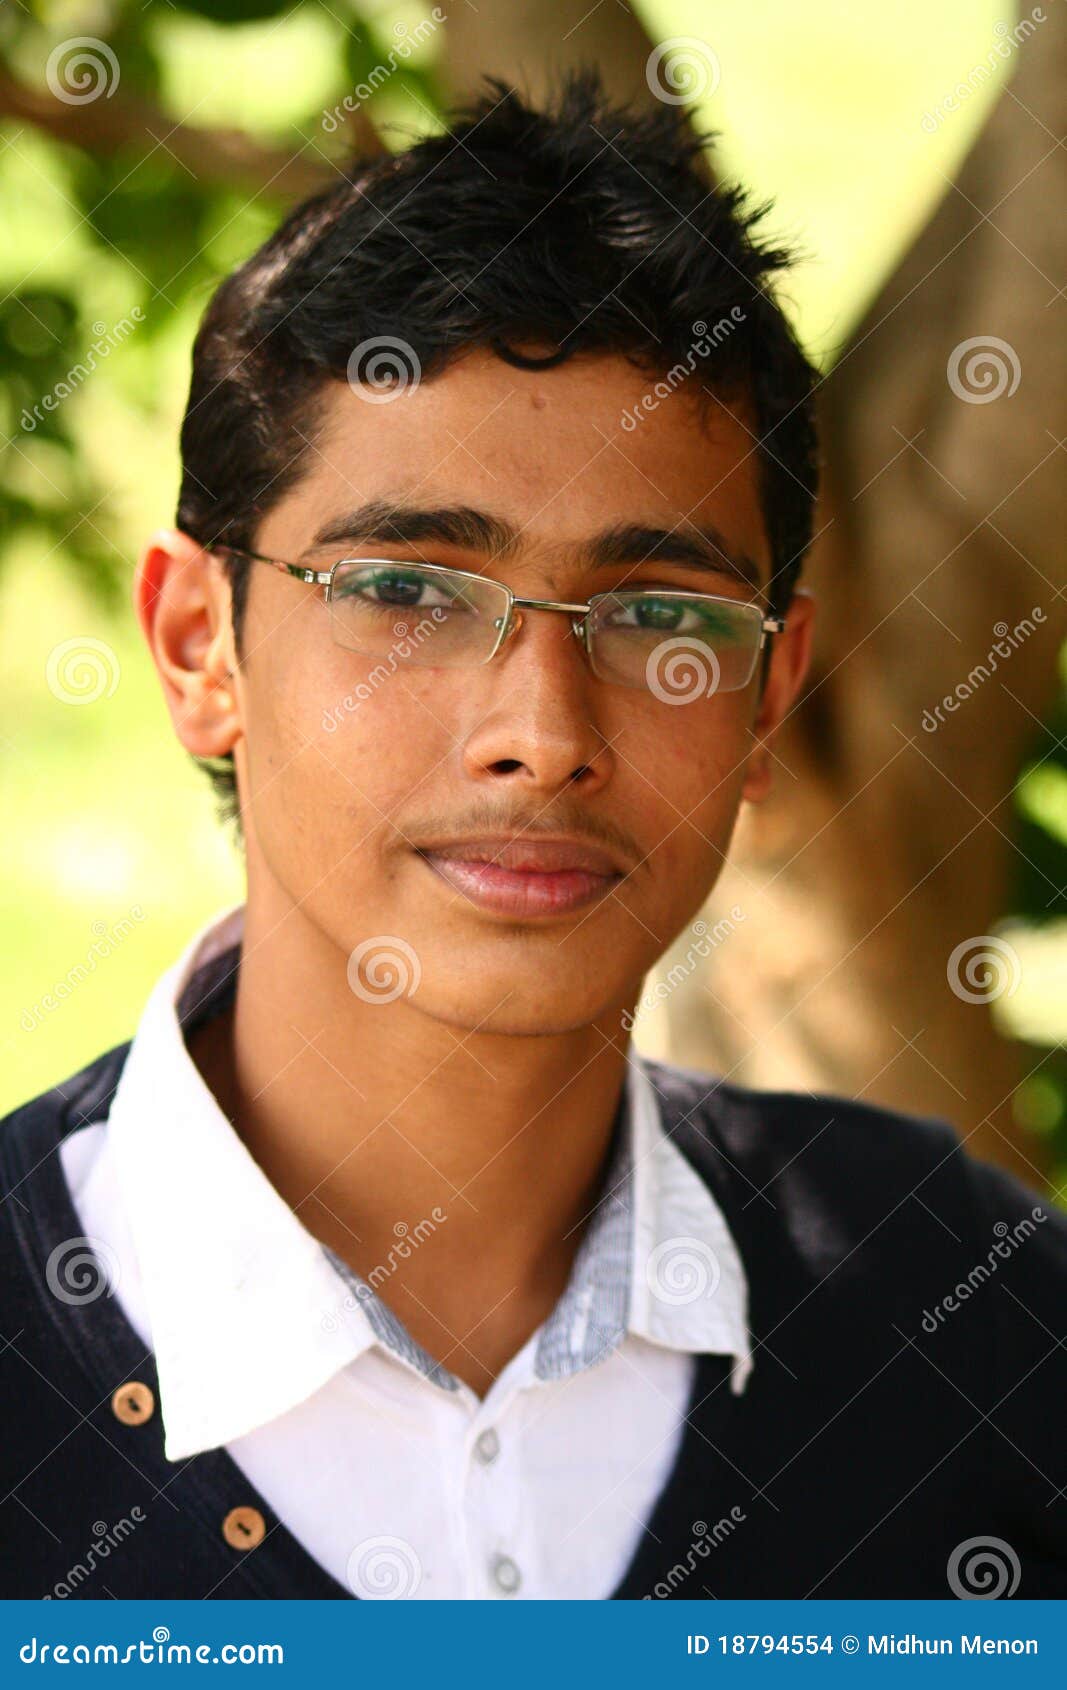 Young Indian Boy With Spiked Hair And Specs Picture. Image: 18794554